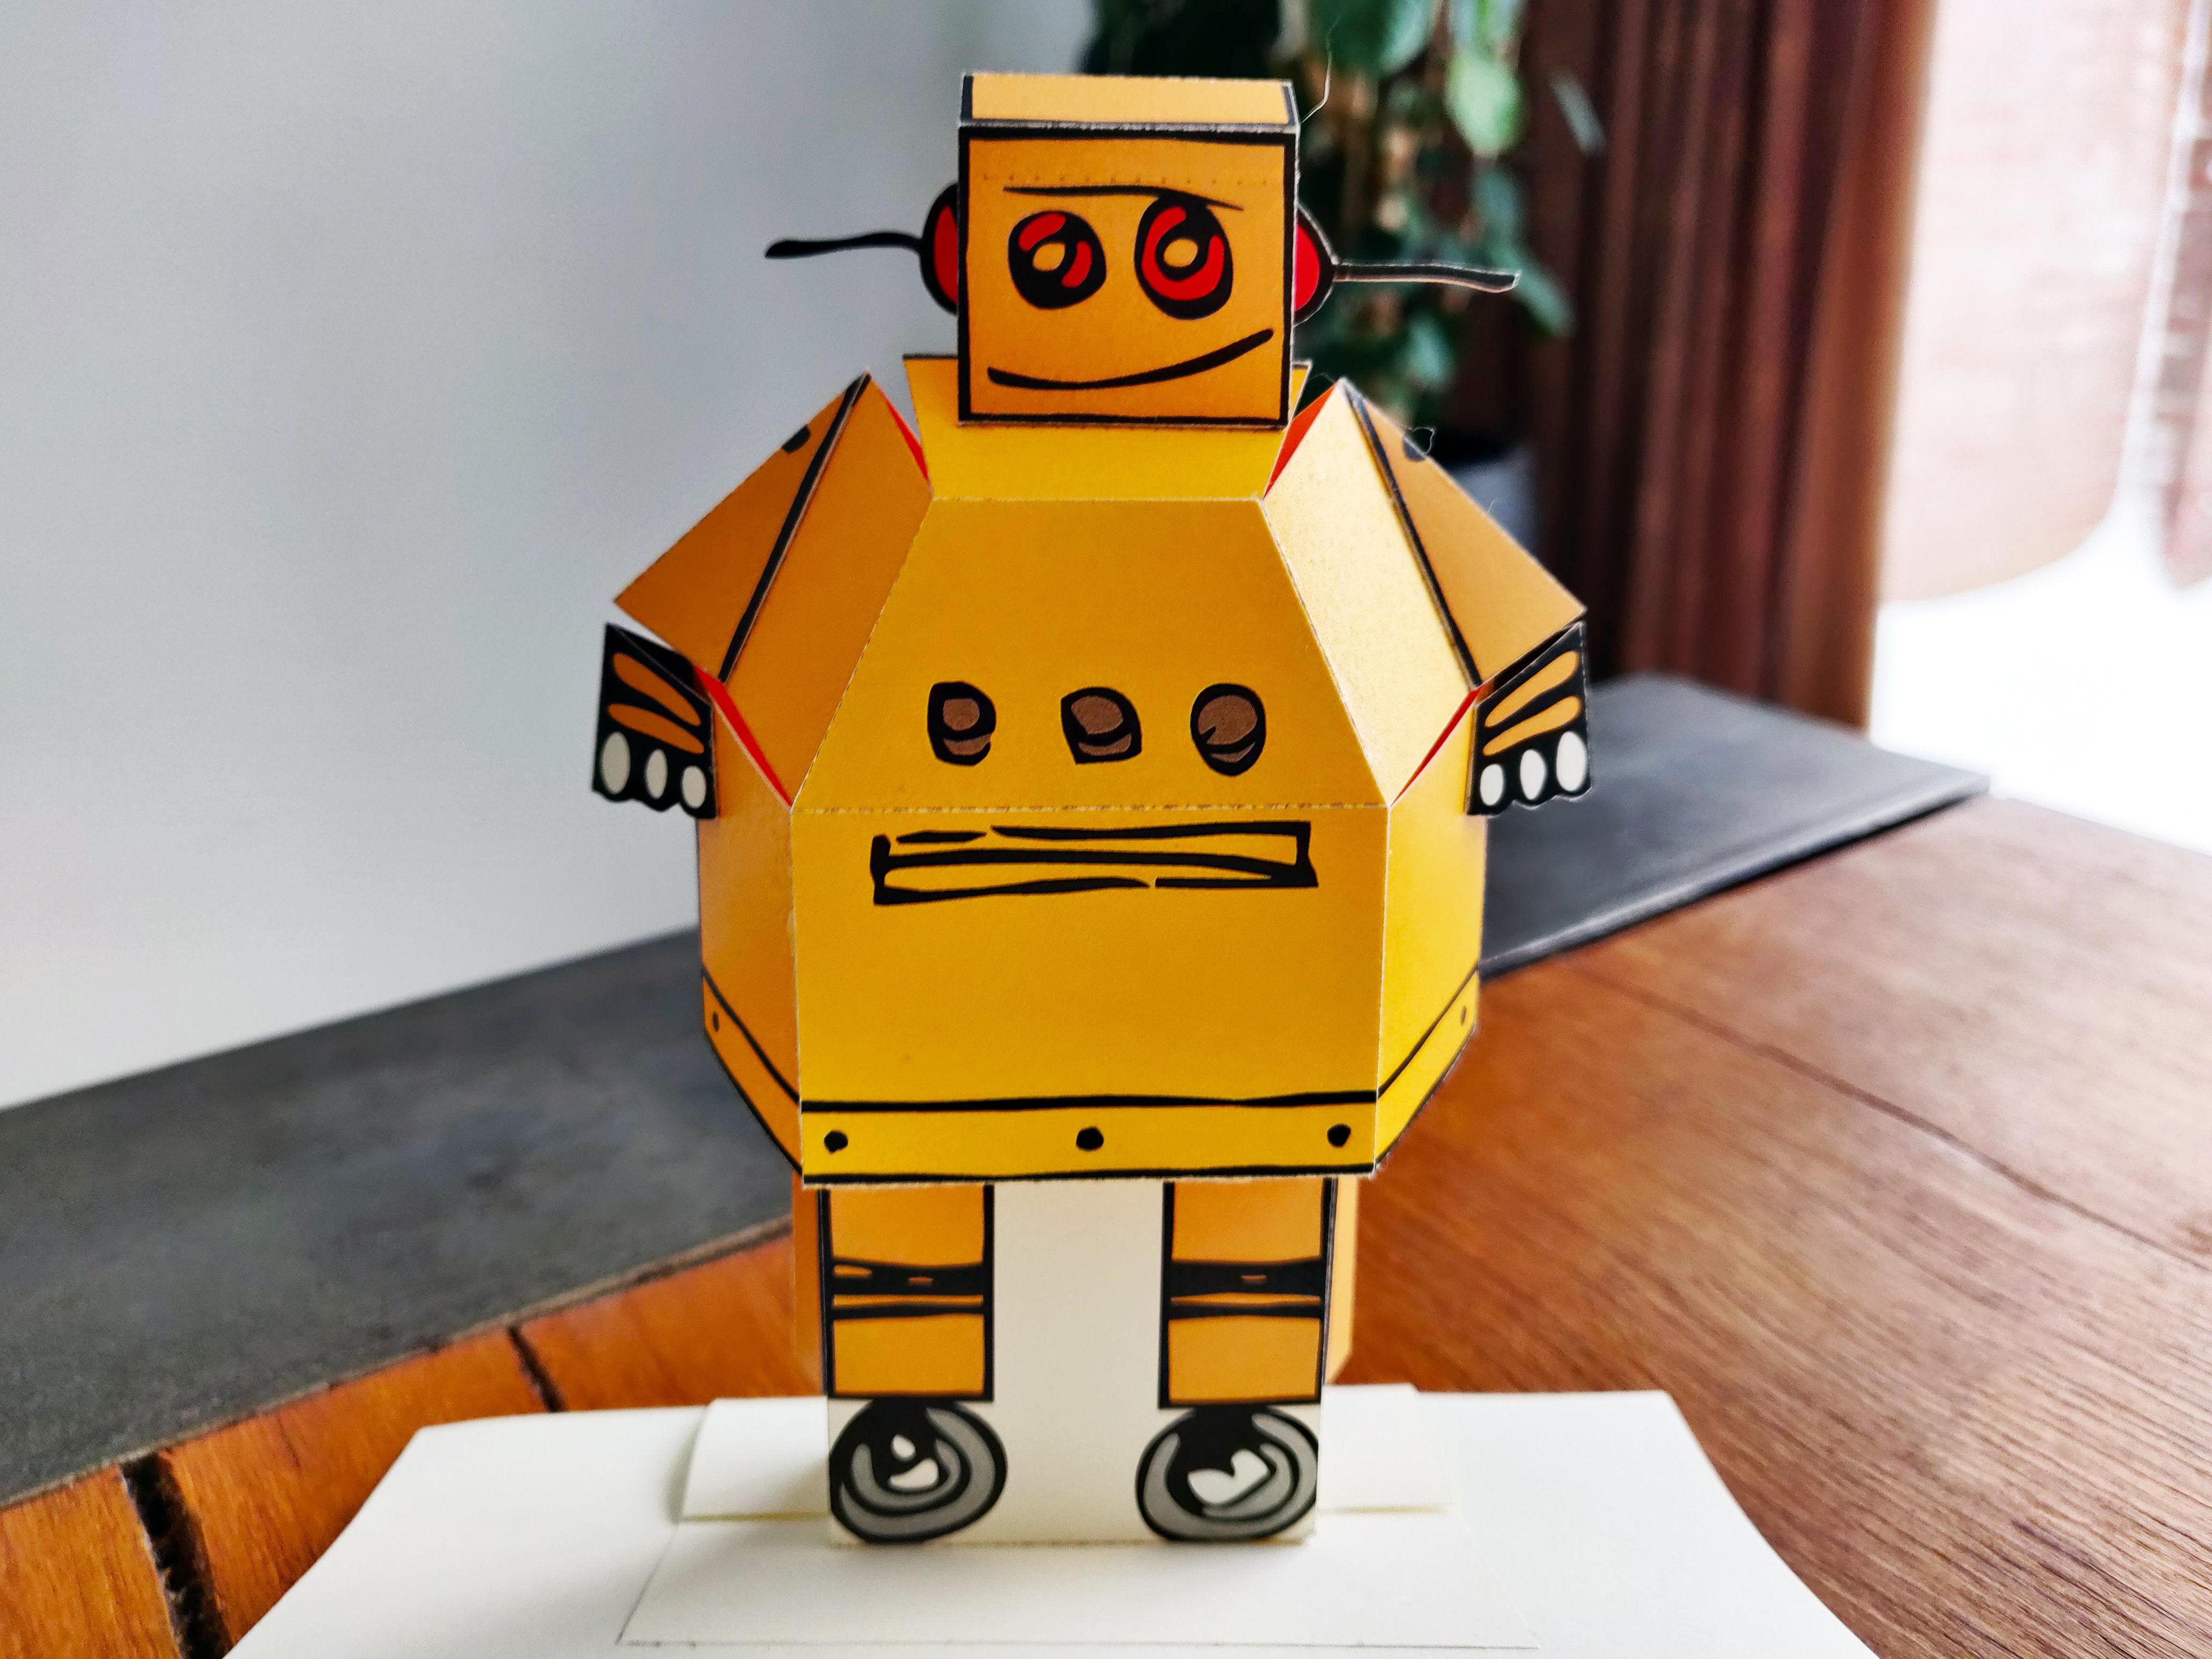 instructables on Twitter: "Build an Robot card (and your own custom pop-up cards!) with FREE templates author ruudcreates 😍 https://t.co/WYYWuibxAV #makerED https://t.co/Y7UuBKW3ED" /